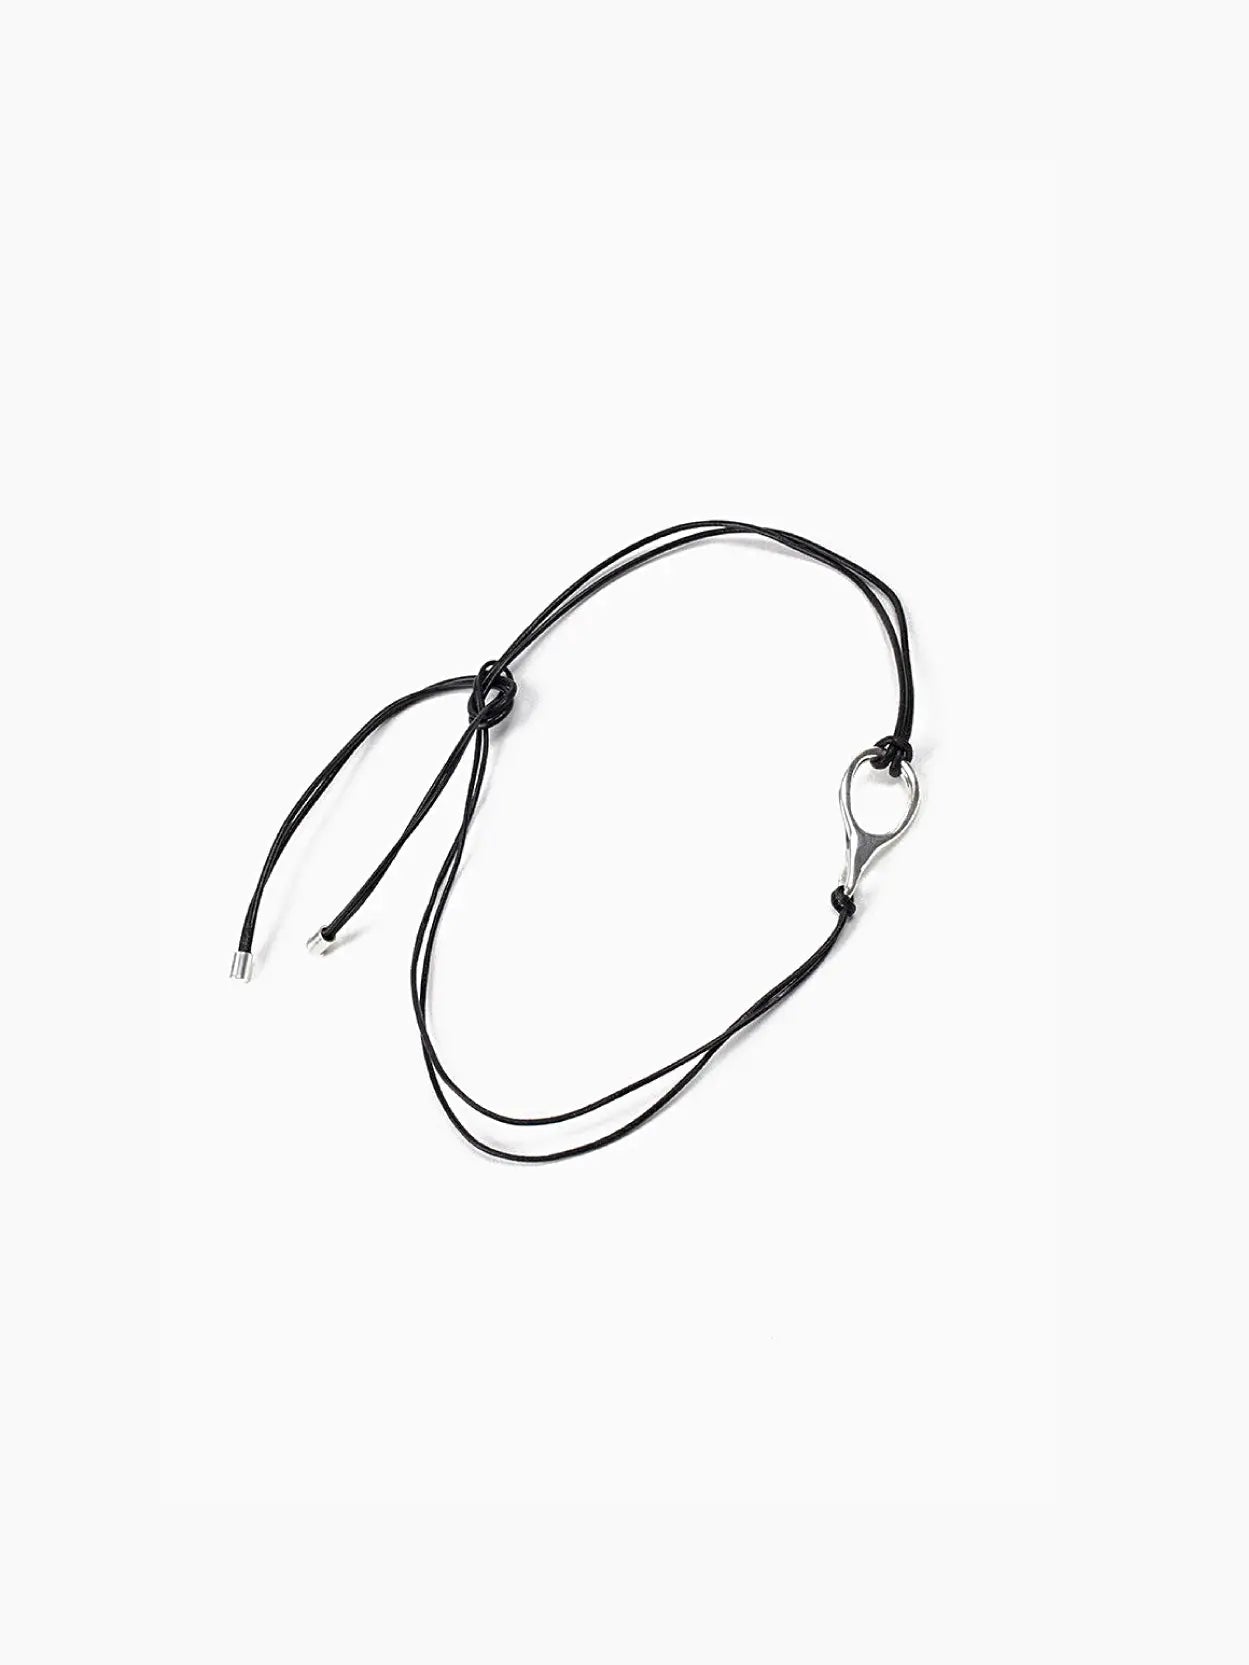 A black, minimalist Toggle Necklace placed on a white background. The necklace, designed by Nathalie Schreckenberg and available at Bassalstore in Barcelona, features adjustable knots and has a small, silver oval charm looped through the cord. The ends of the cord have metallic tips.